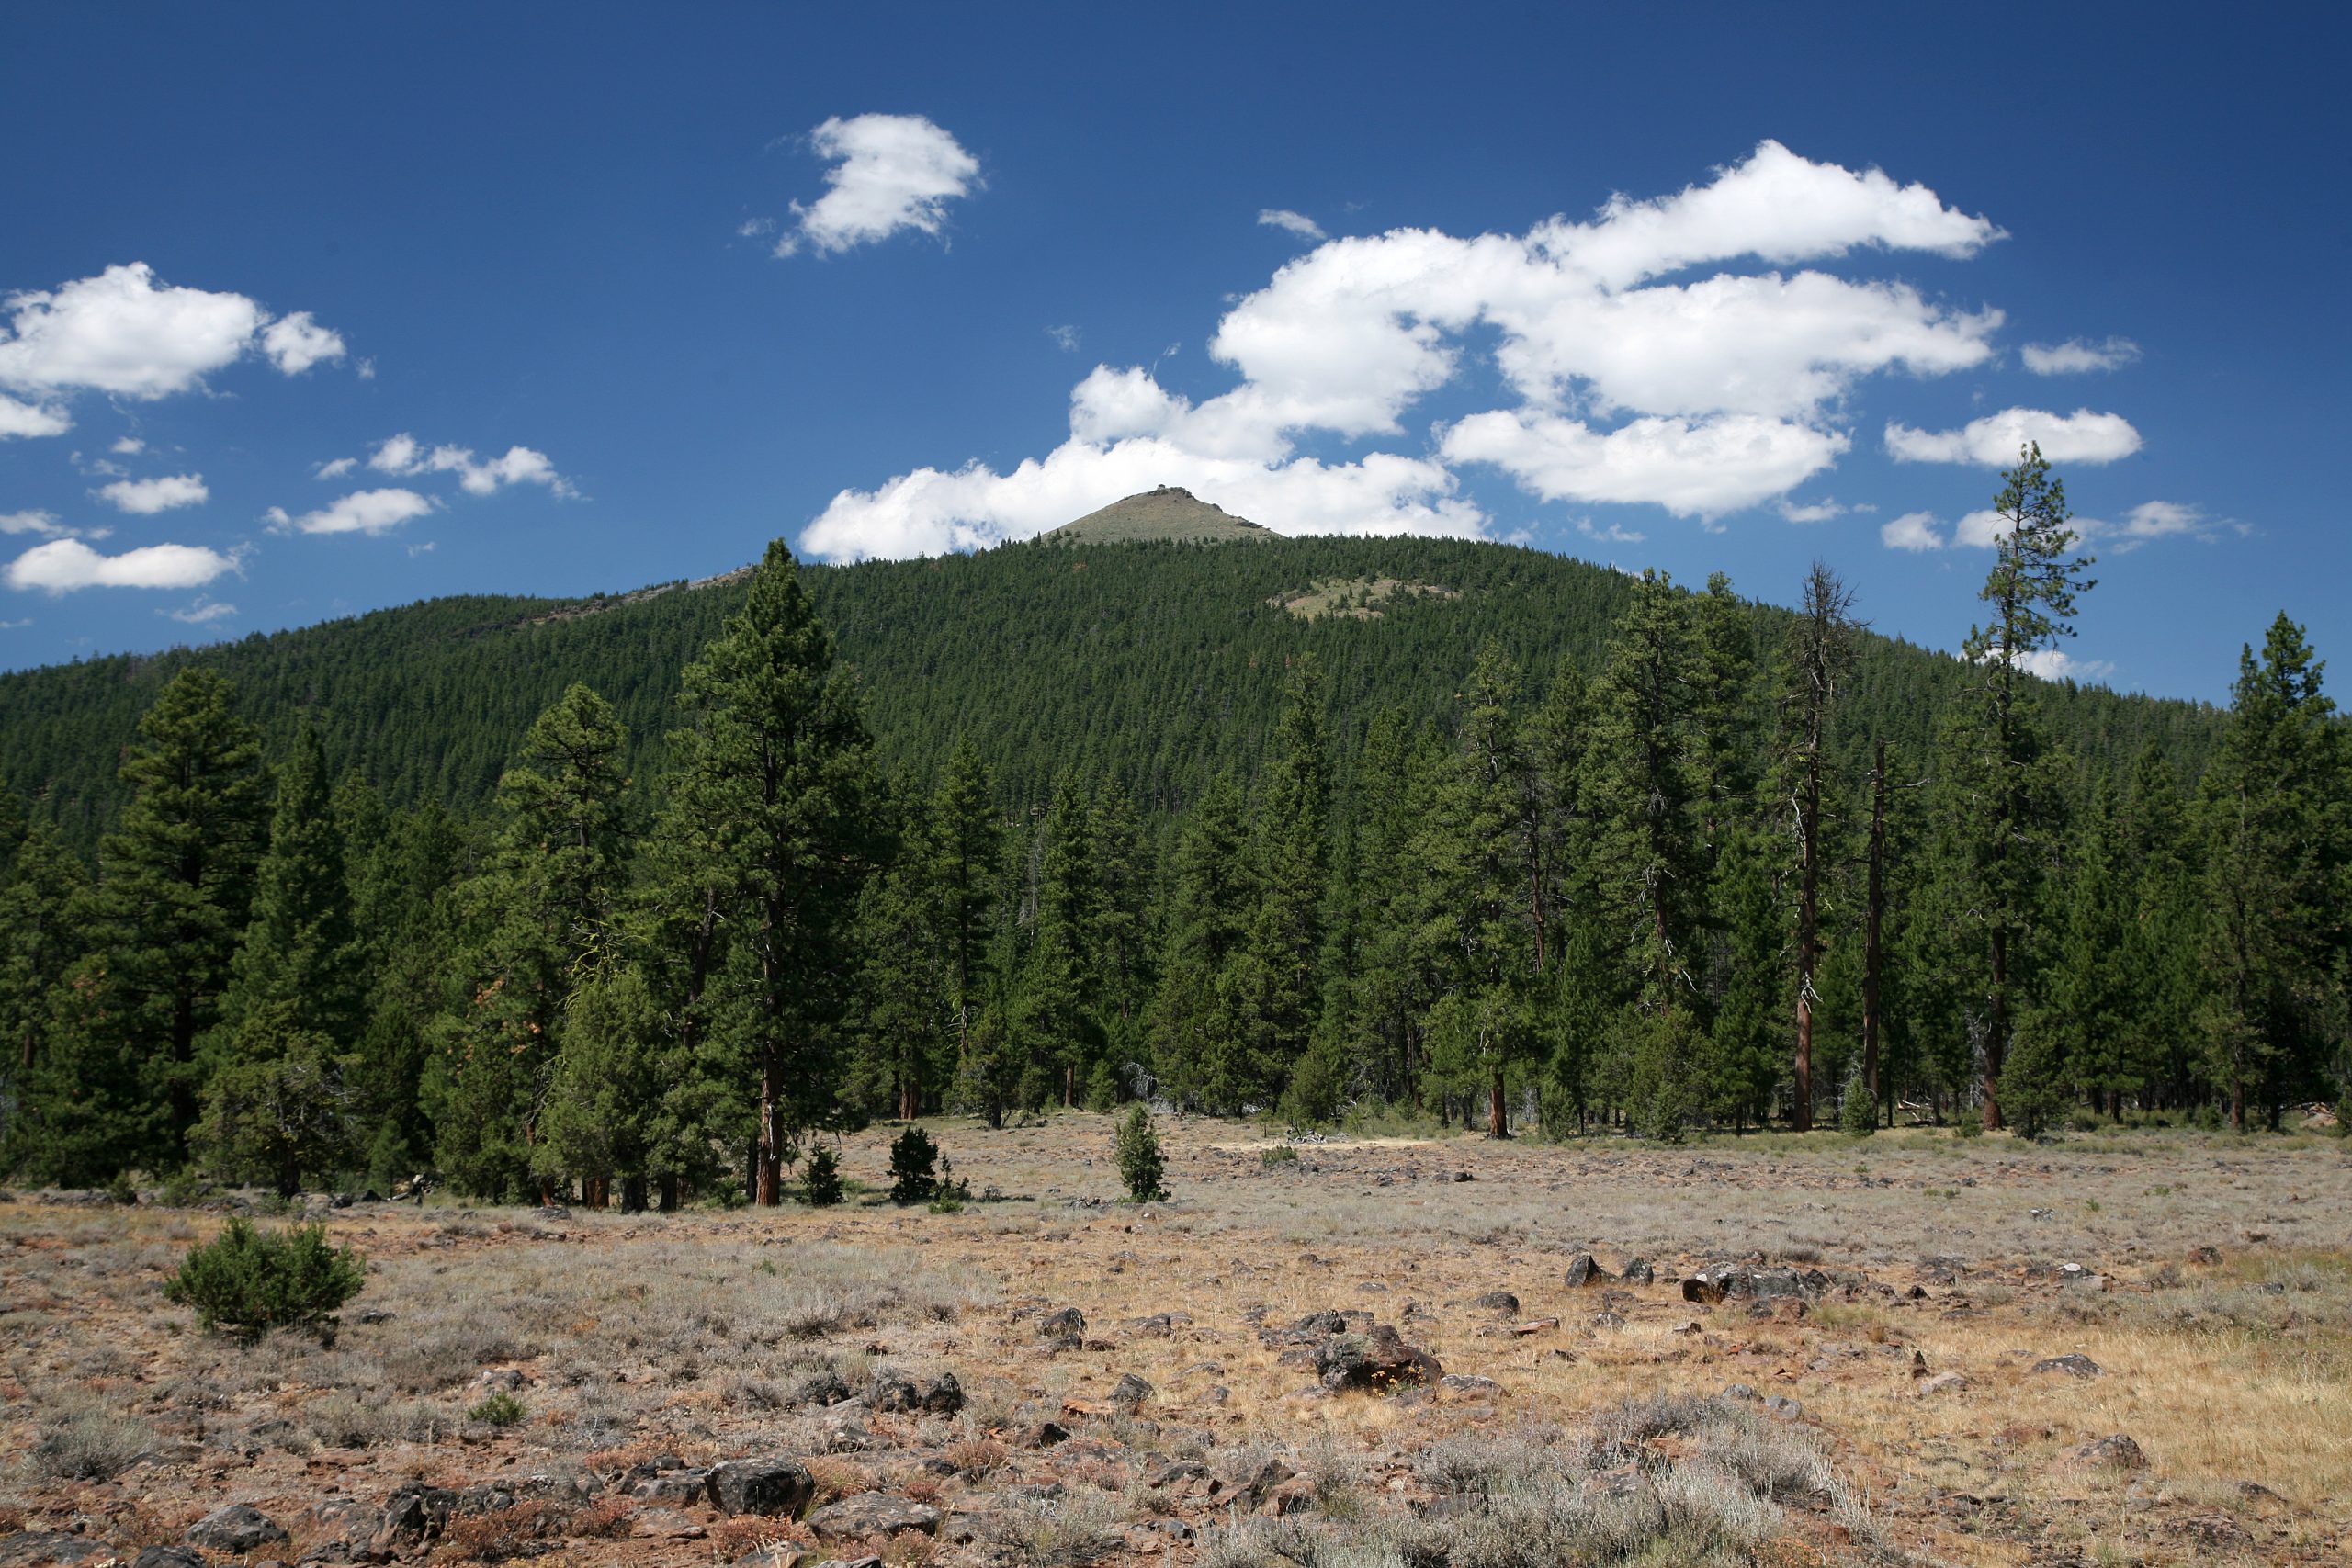 View of Hager Mountain from Grassland by Thompson Reservoir on the Fremont-Winema National Forest in Southern Oregon.